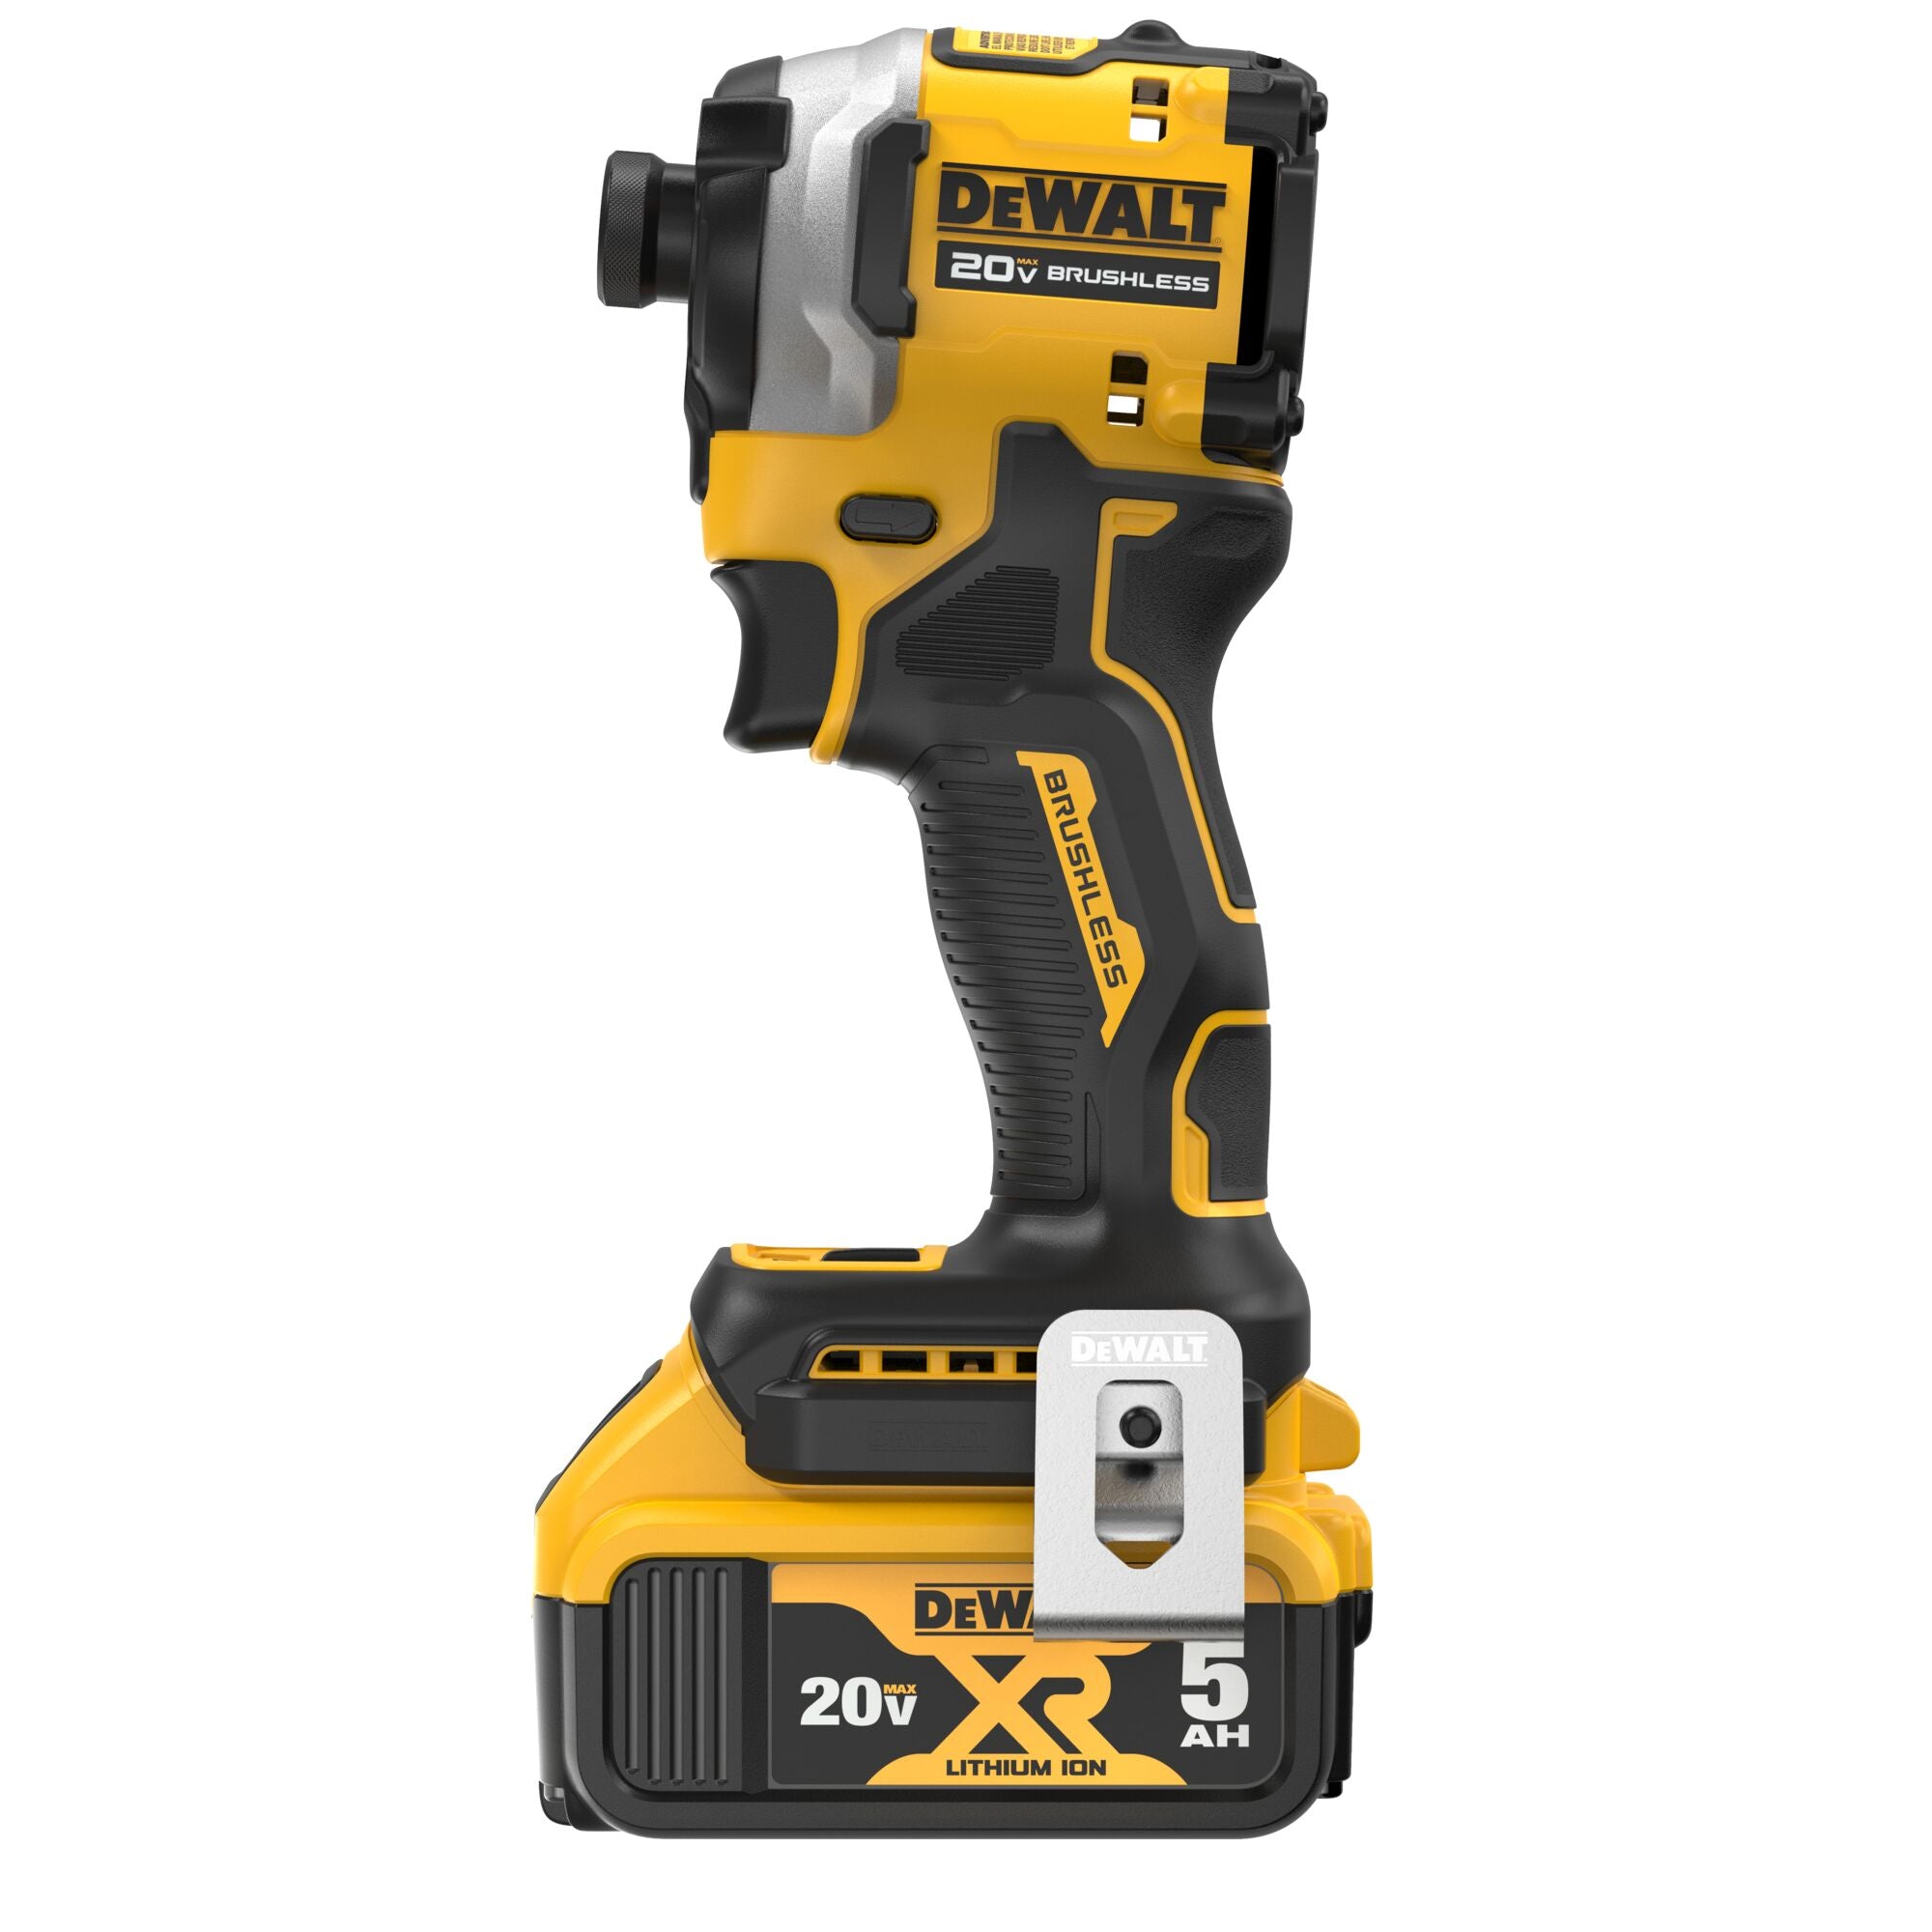 DeWALT DCF850P1 Atomic Impact Drill 1/4" 20 Volt Cordless, Brushless Tool, Bag, One Battery and Charger